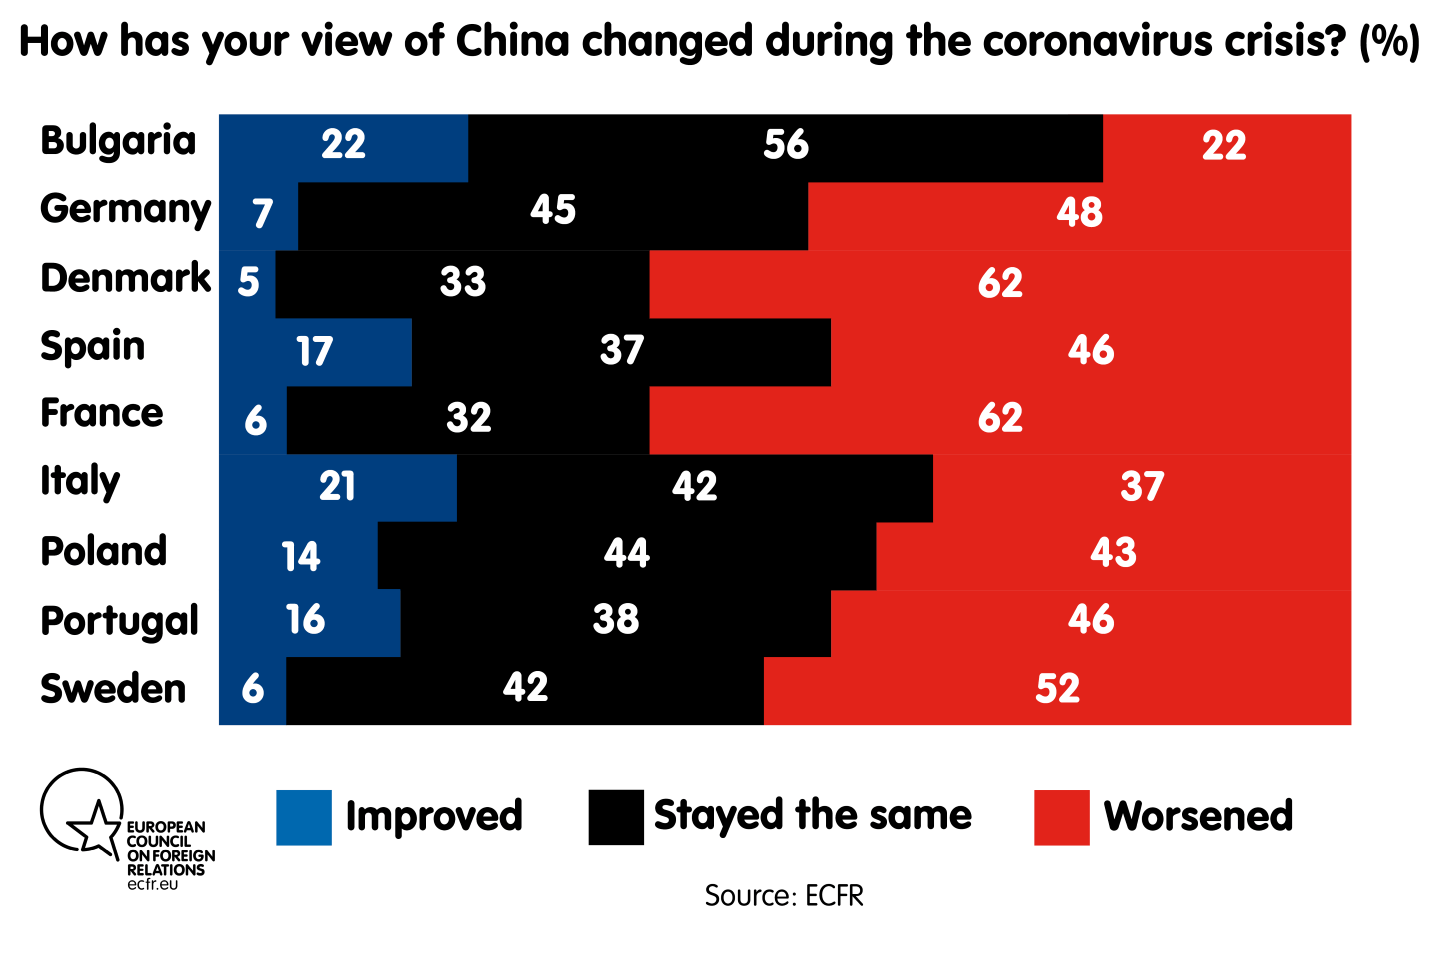 How has your view of China changed during the coronavirus crisis?